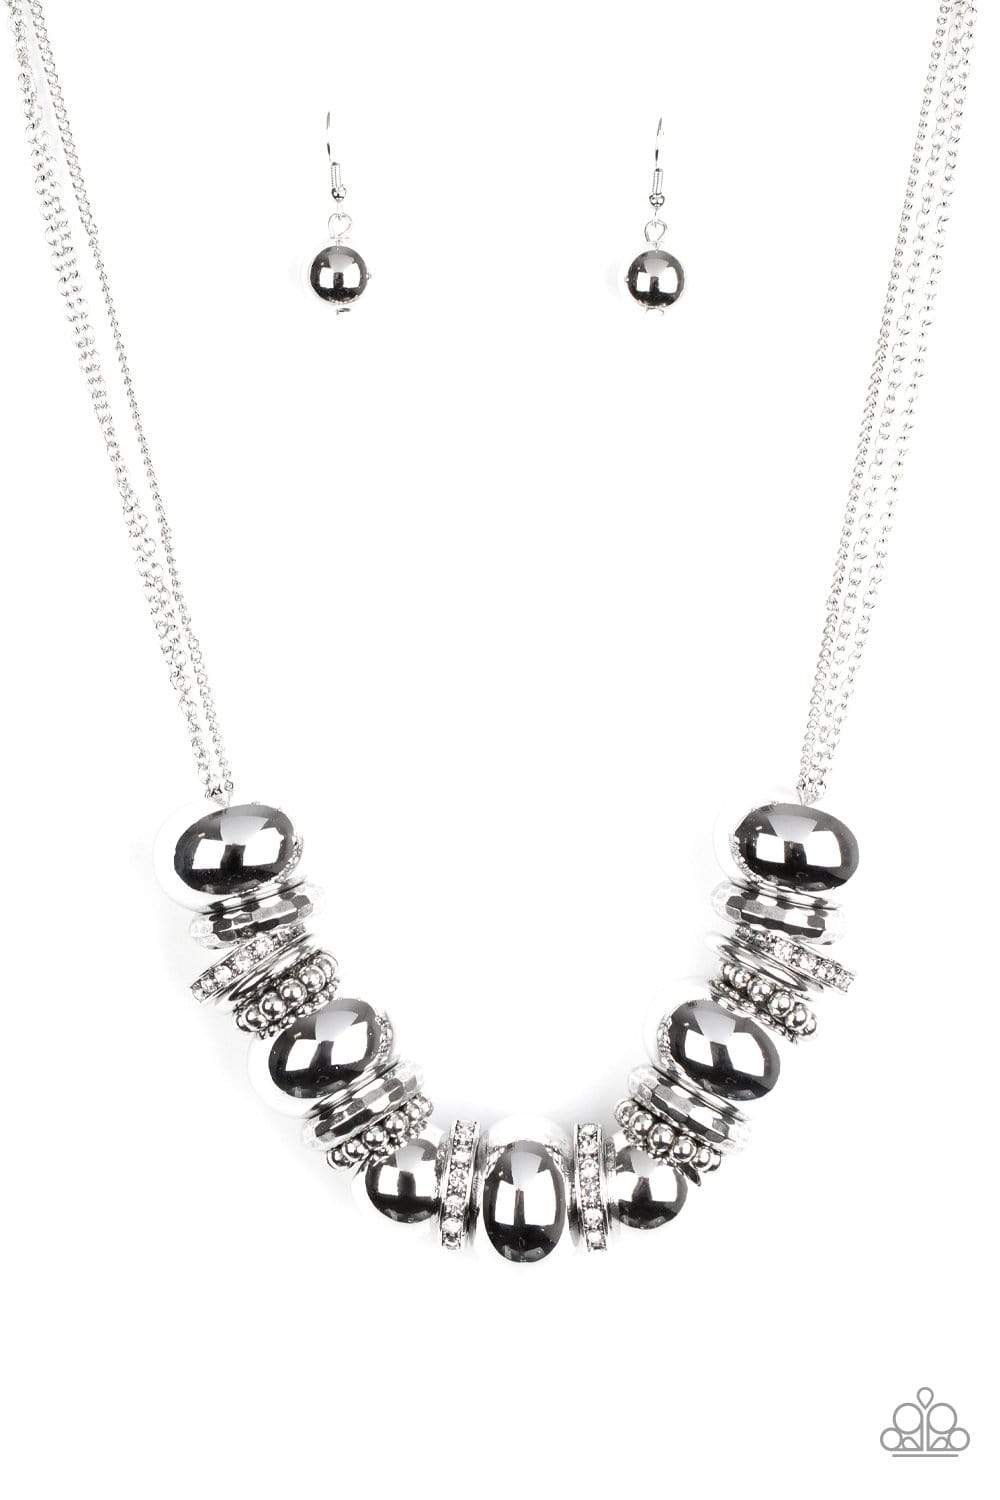 Only The Brave - White - Paparazzi necklace